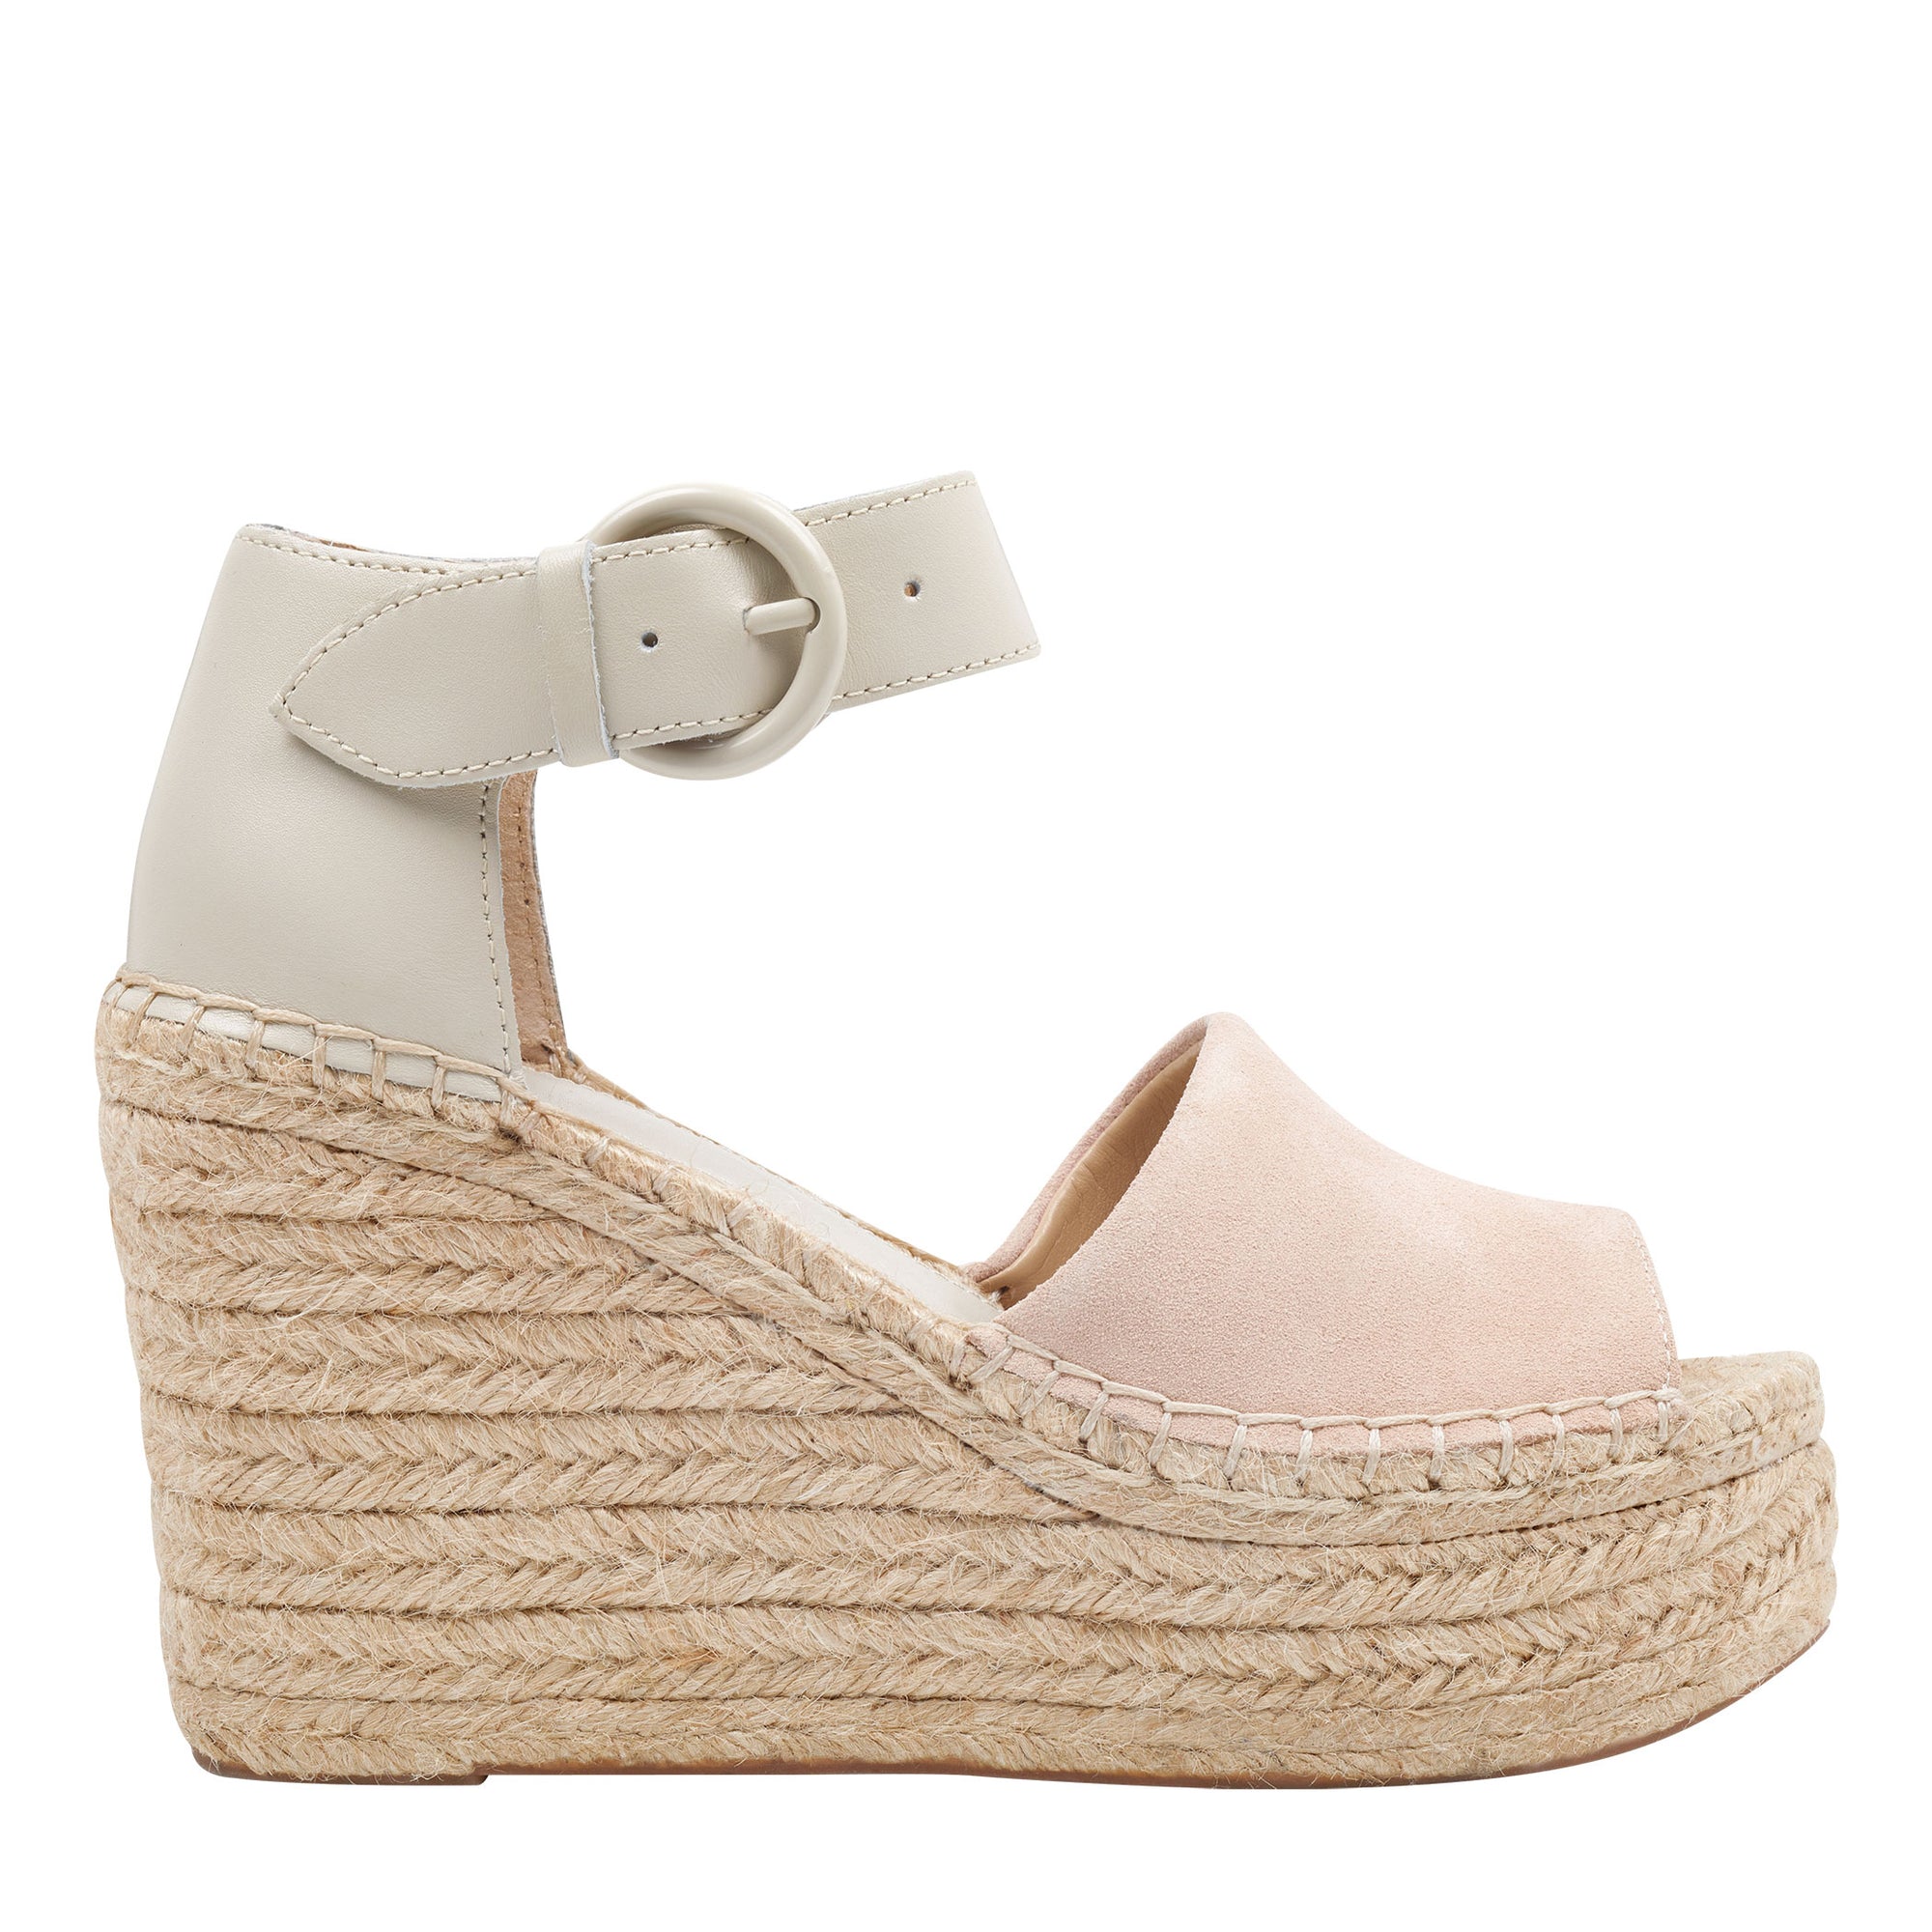 baby pink wedges